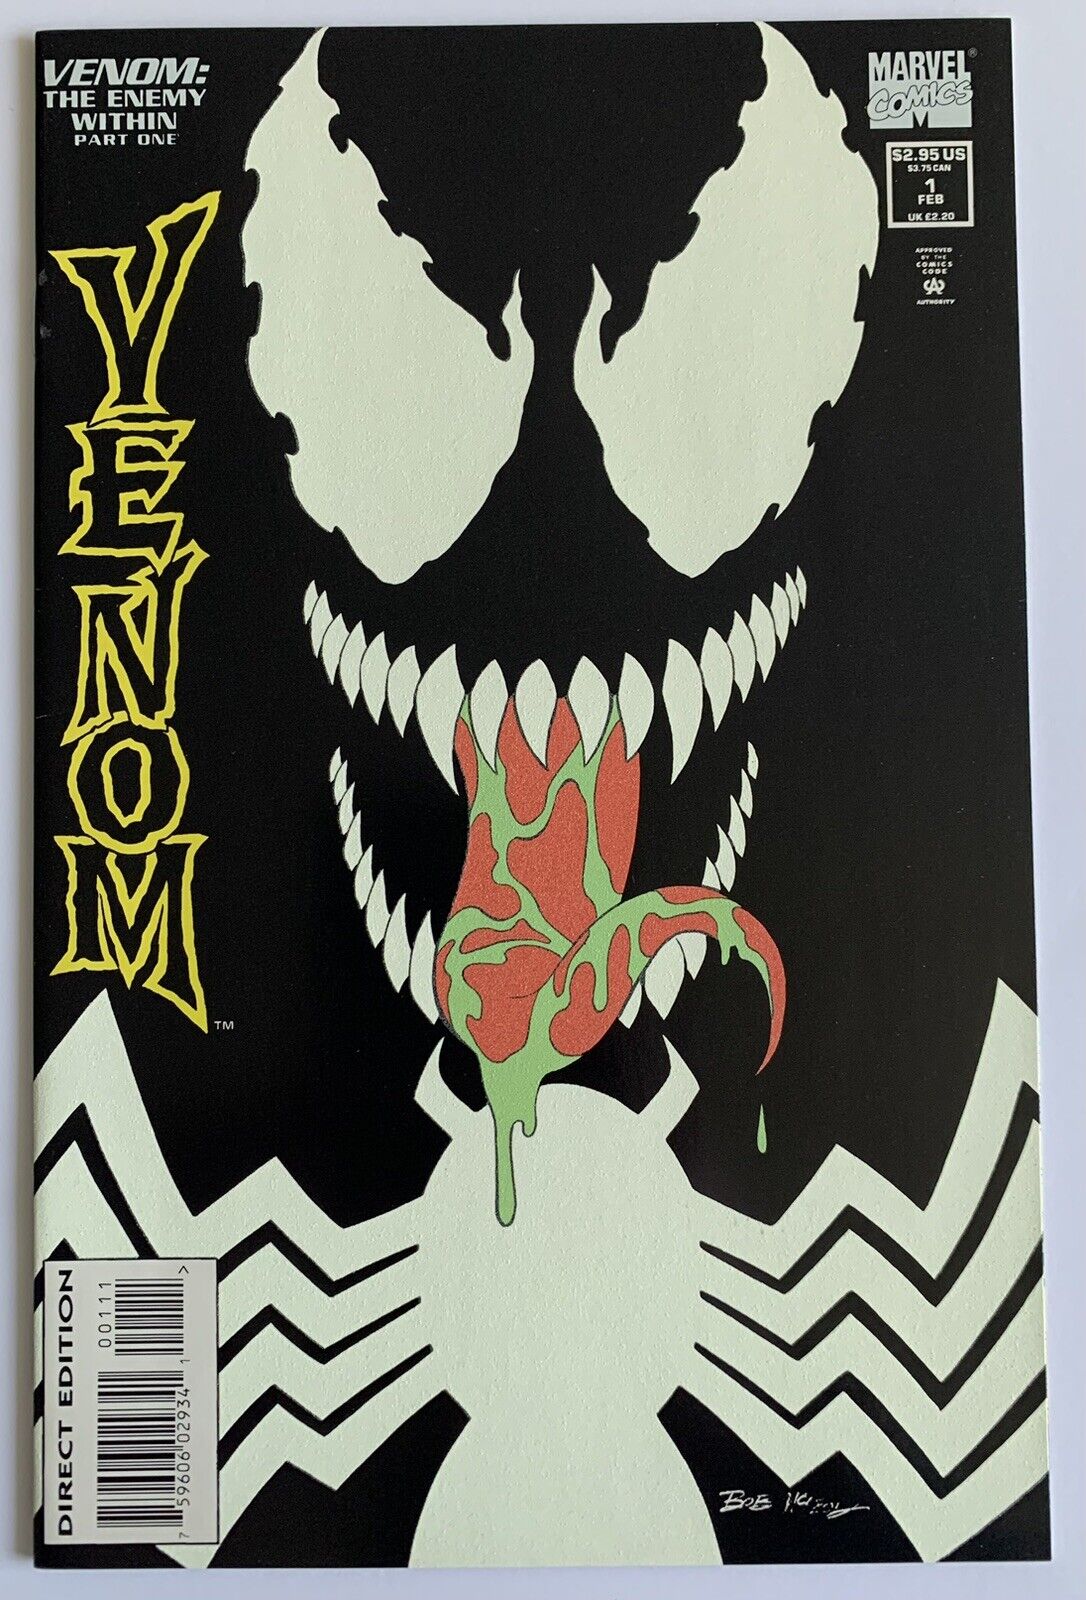 Venom The Enemy Within #1 Part One (Feb 1994) NM+